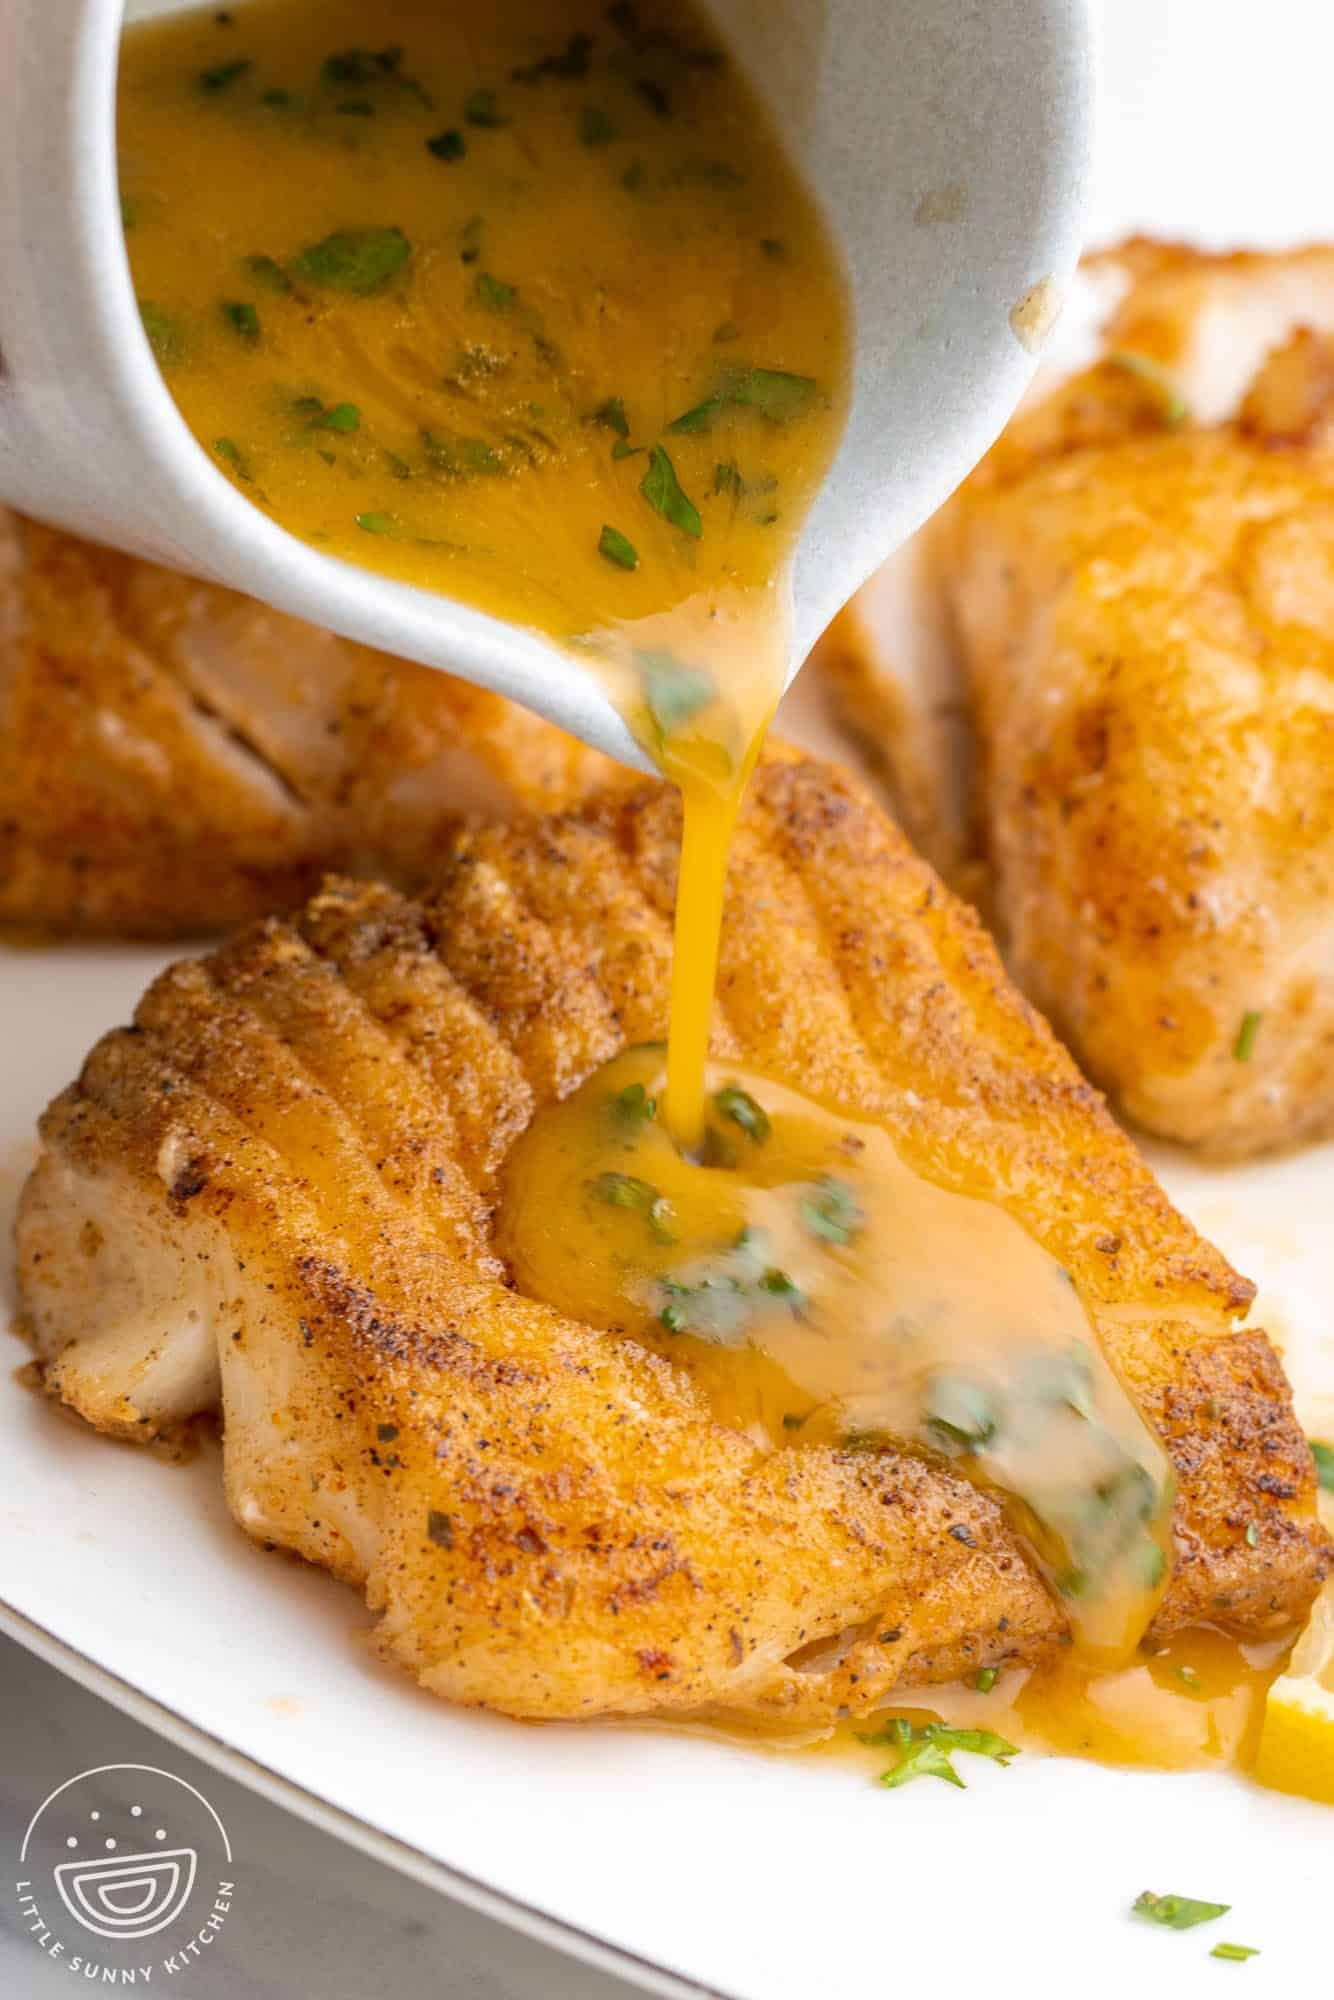 lemon butter sauce poured over pan seared cod fillets.